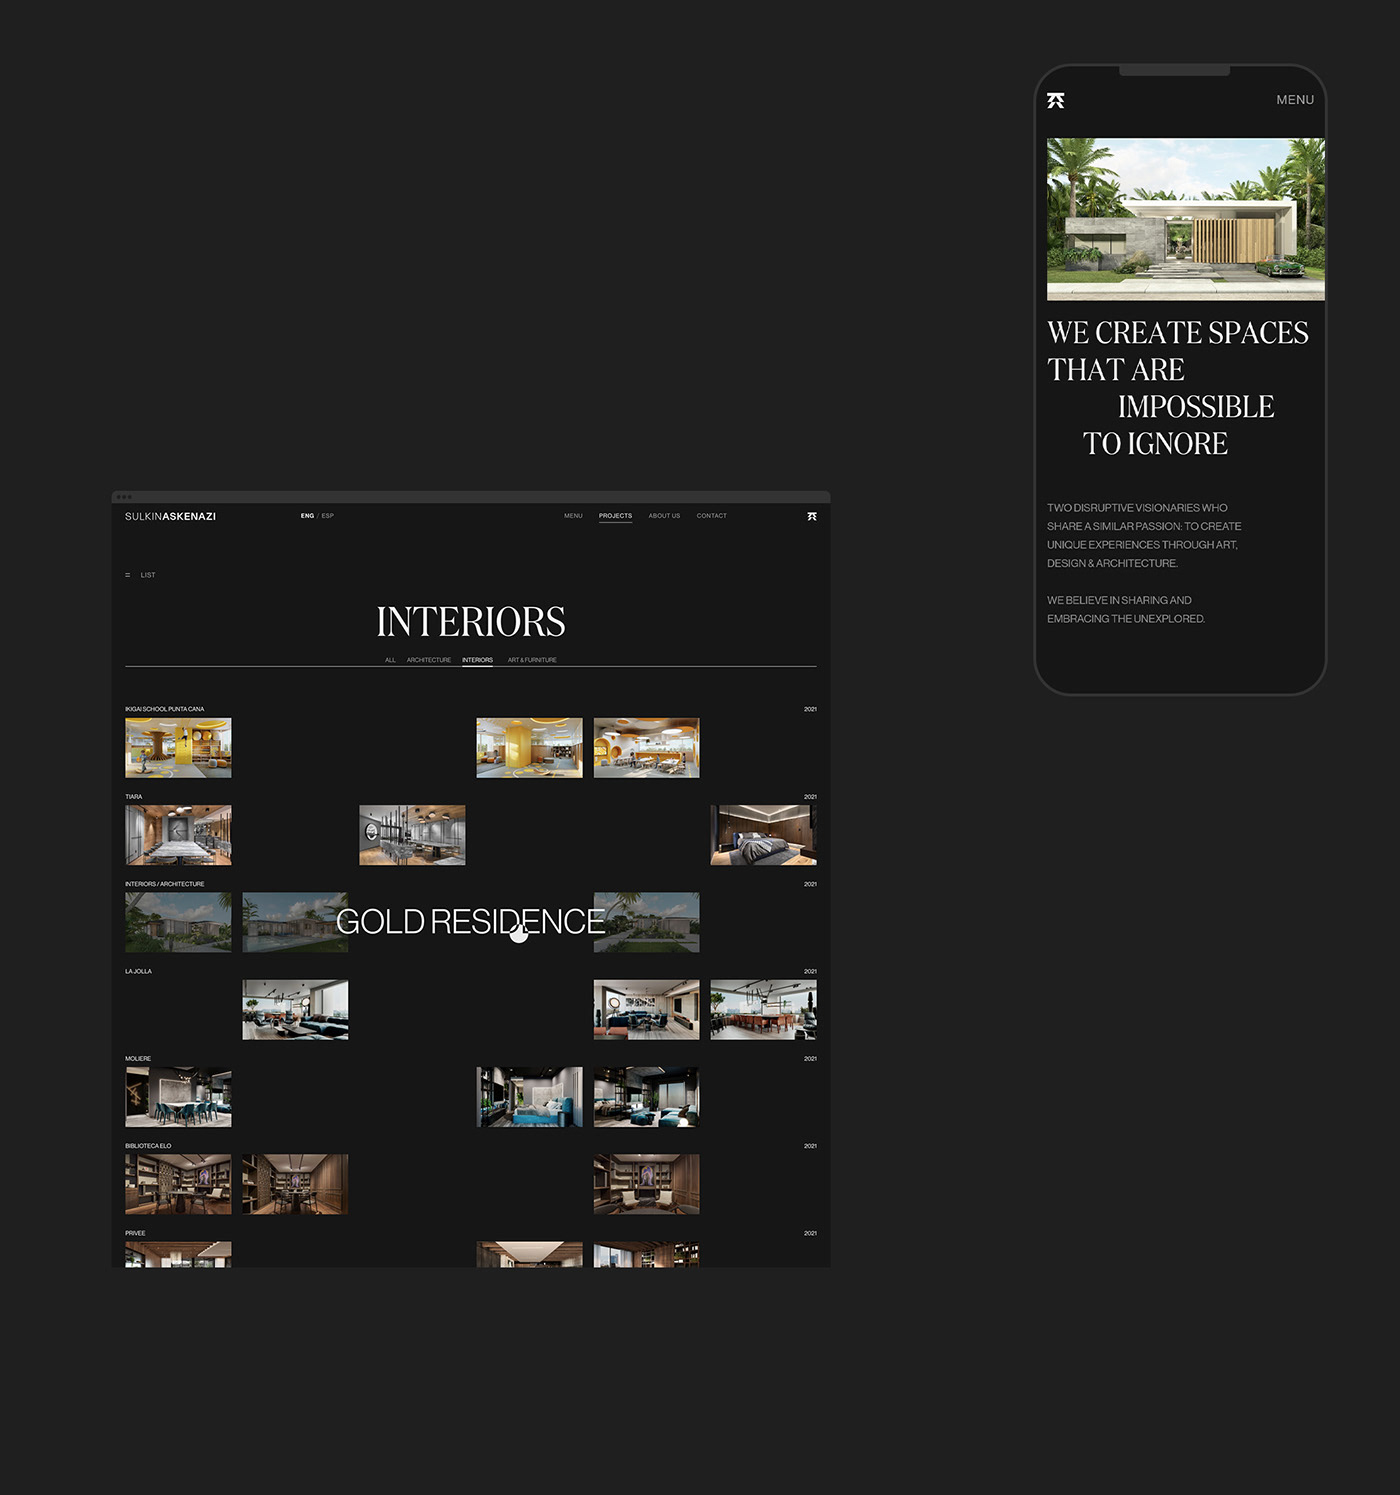 Mobile Design & Editorial Grid Layout for Web Design Project
